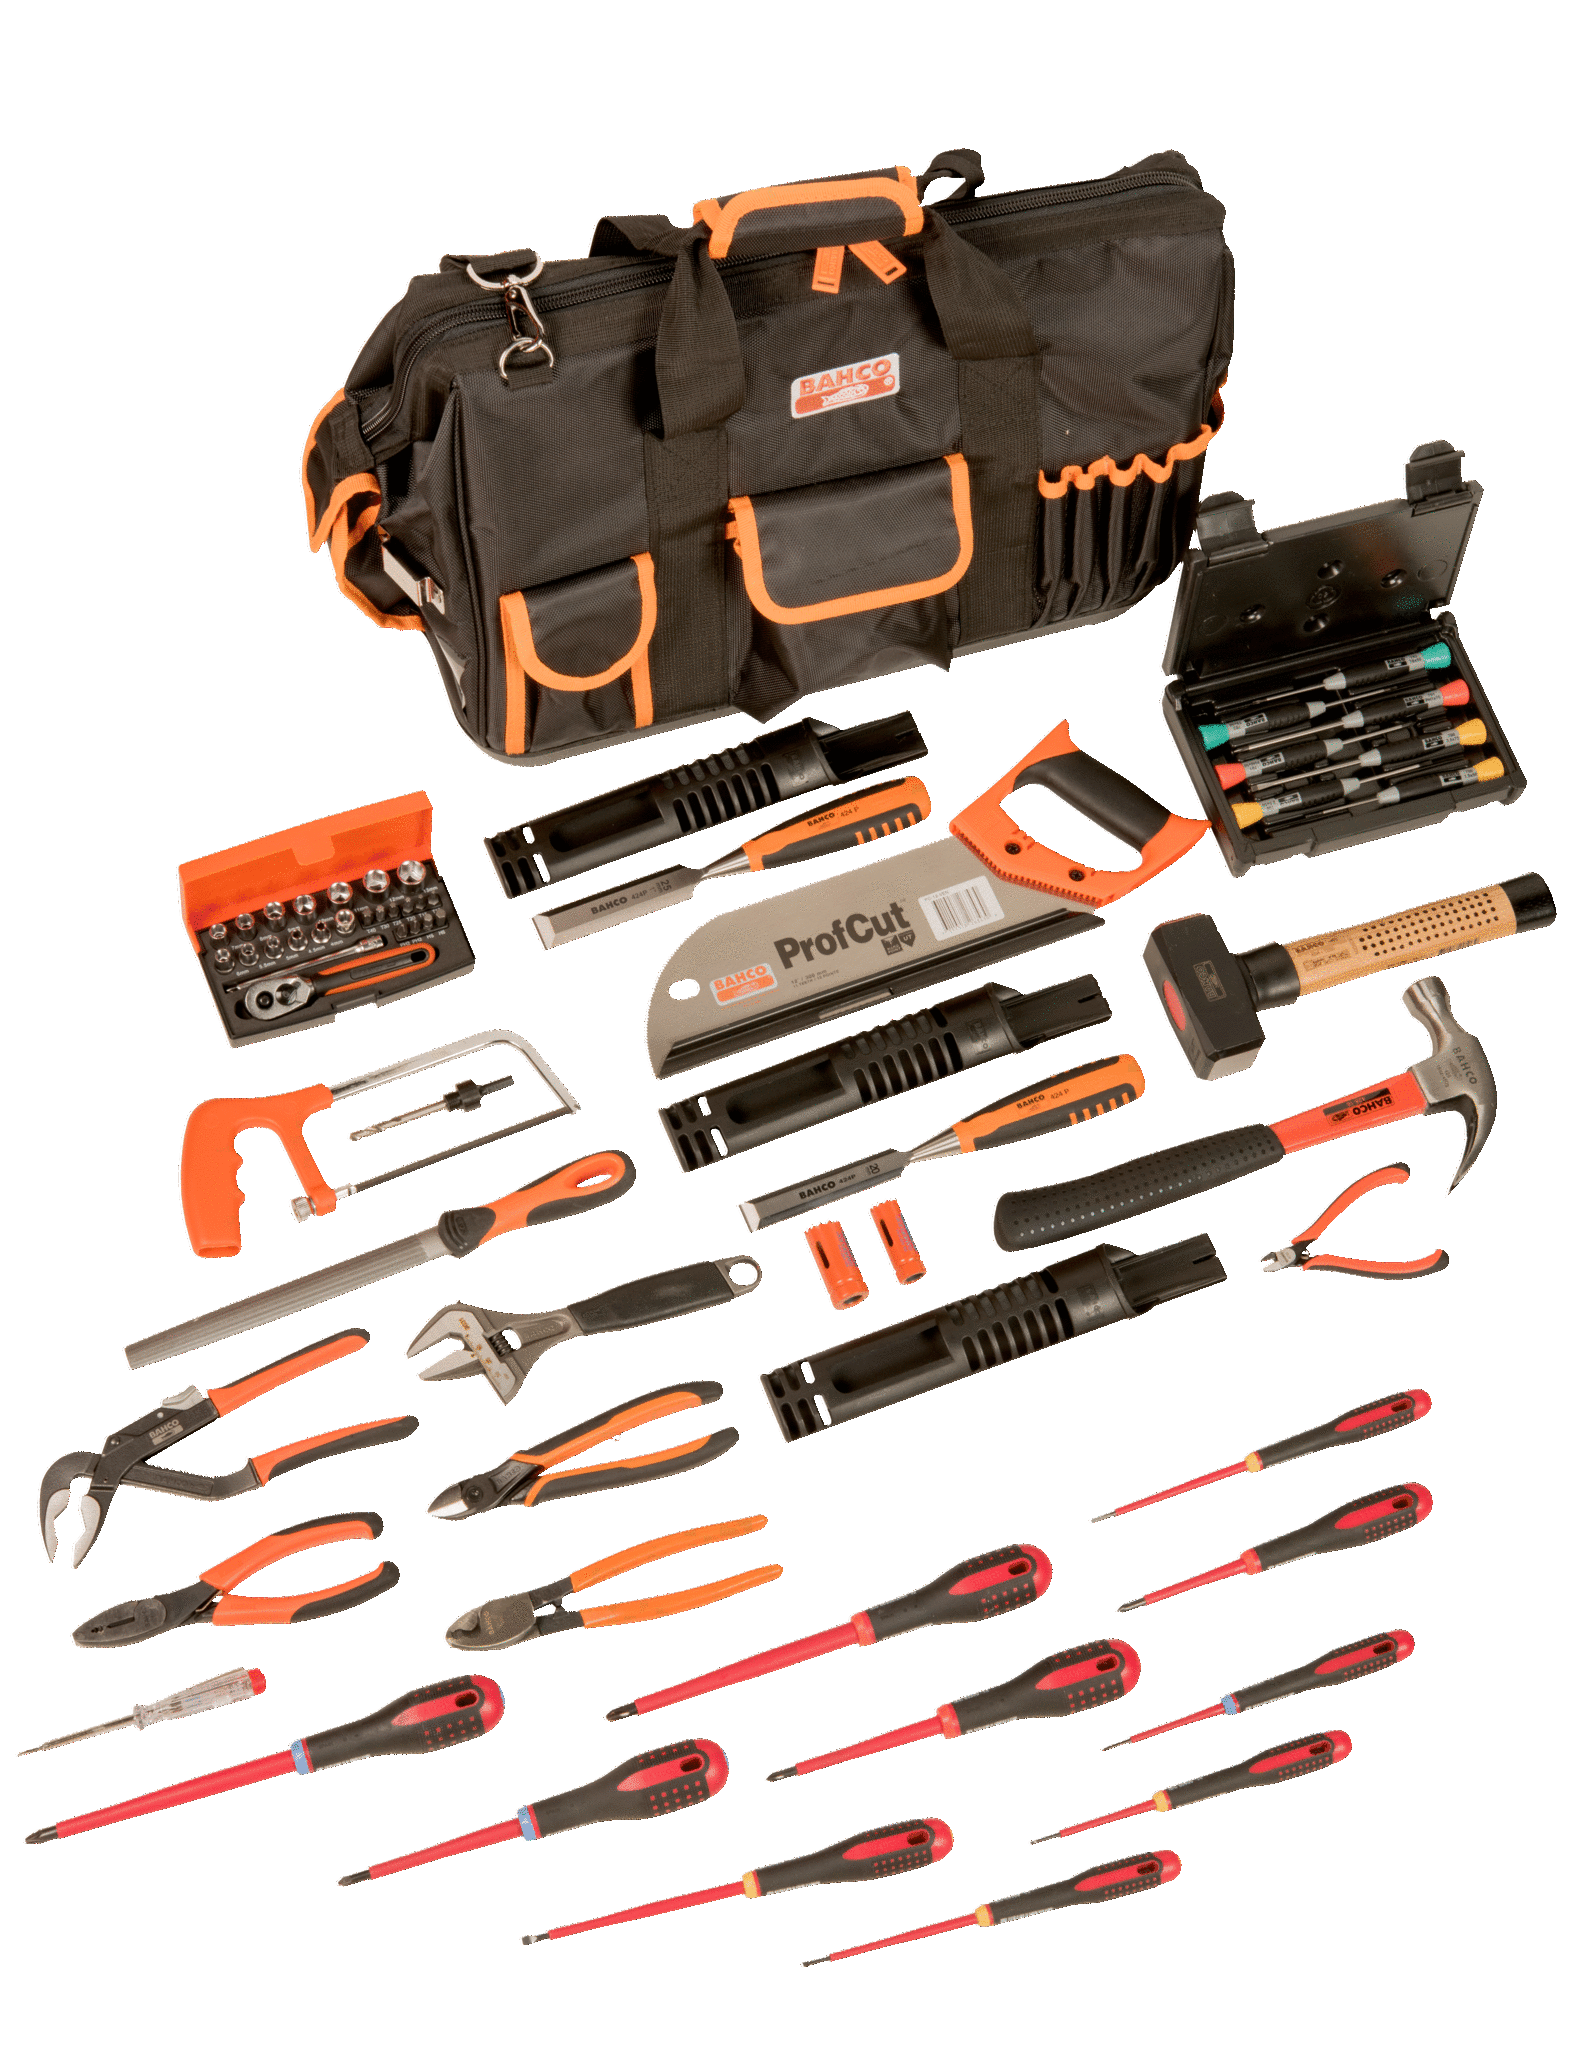 Bahco IRIMO 5 Piece TOOL BELT POUCH SET NEW 9022-3-30 Side Cutter Screwdriver Bahco 